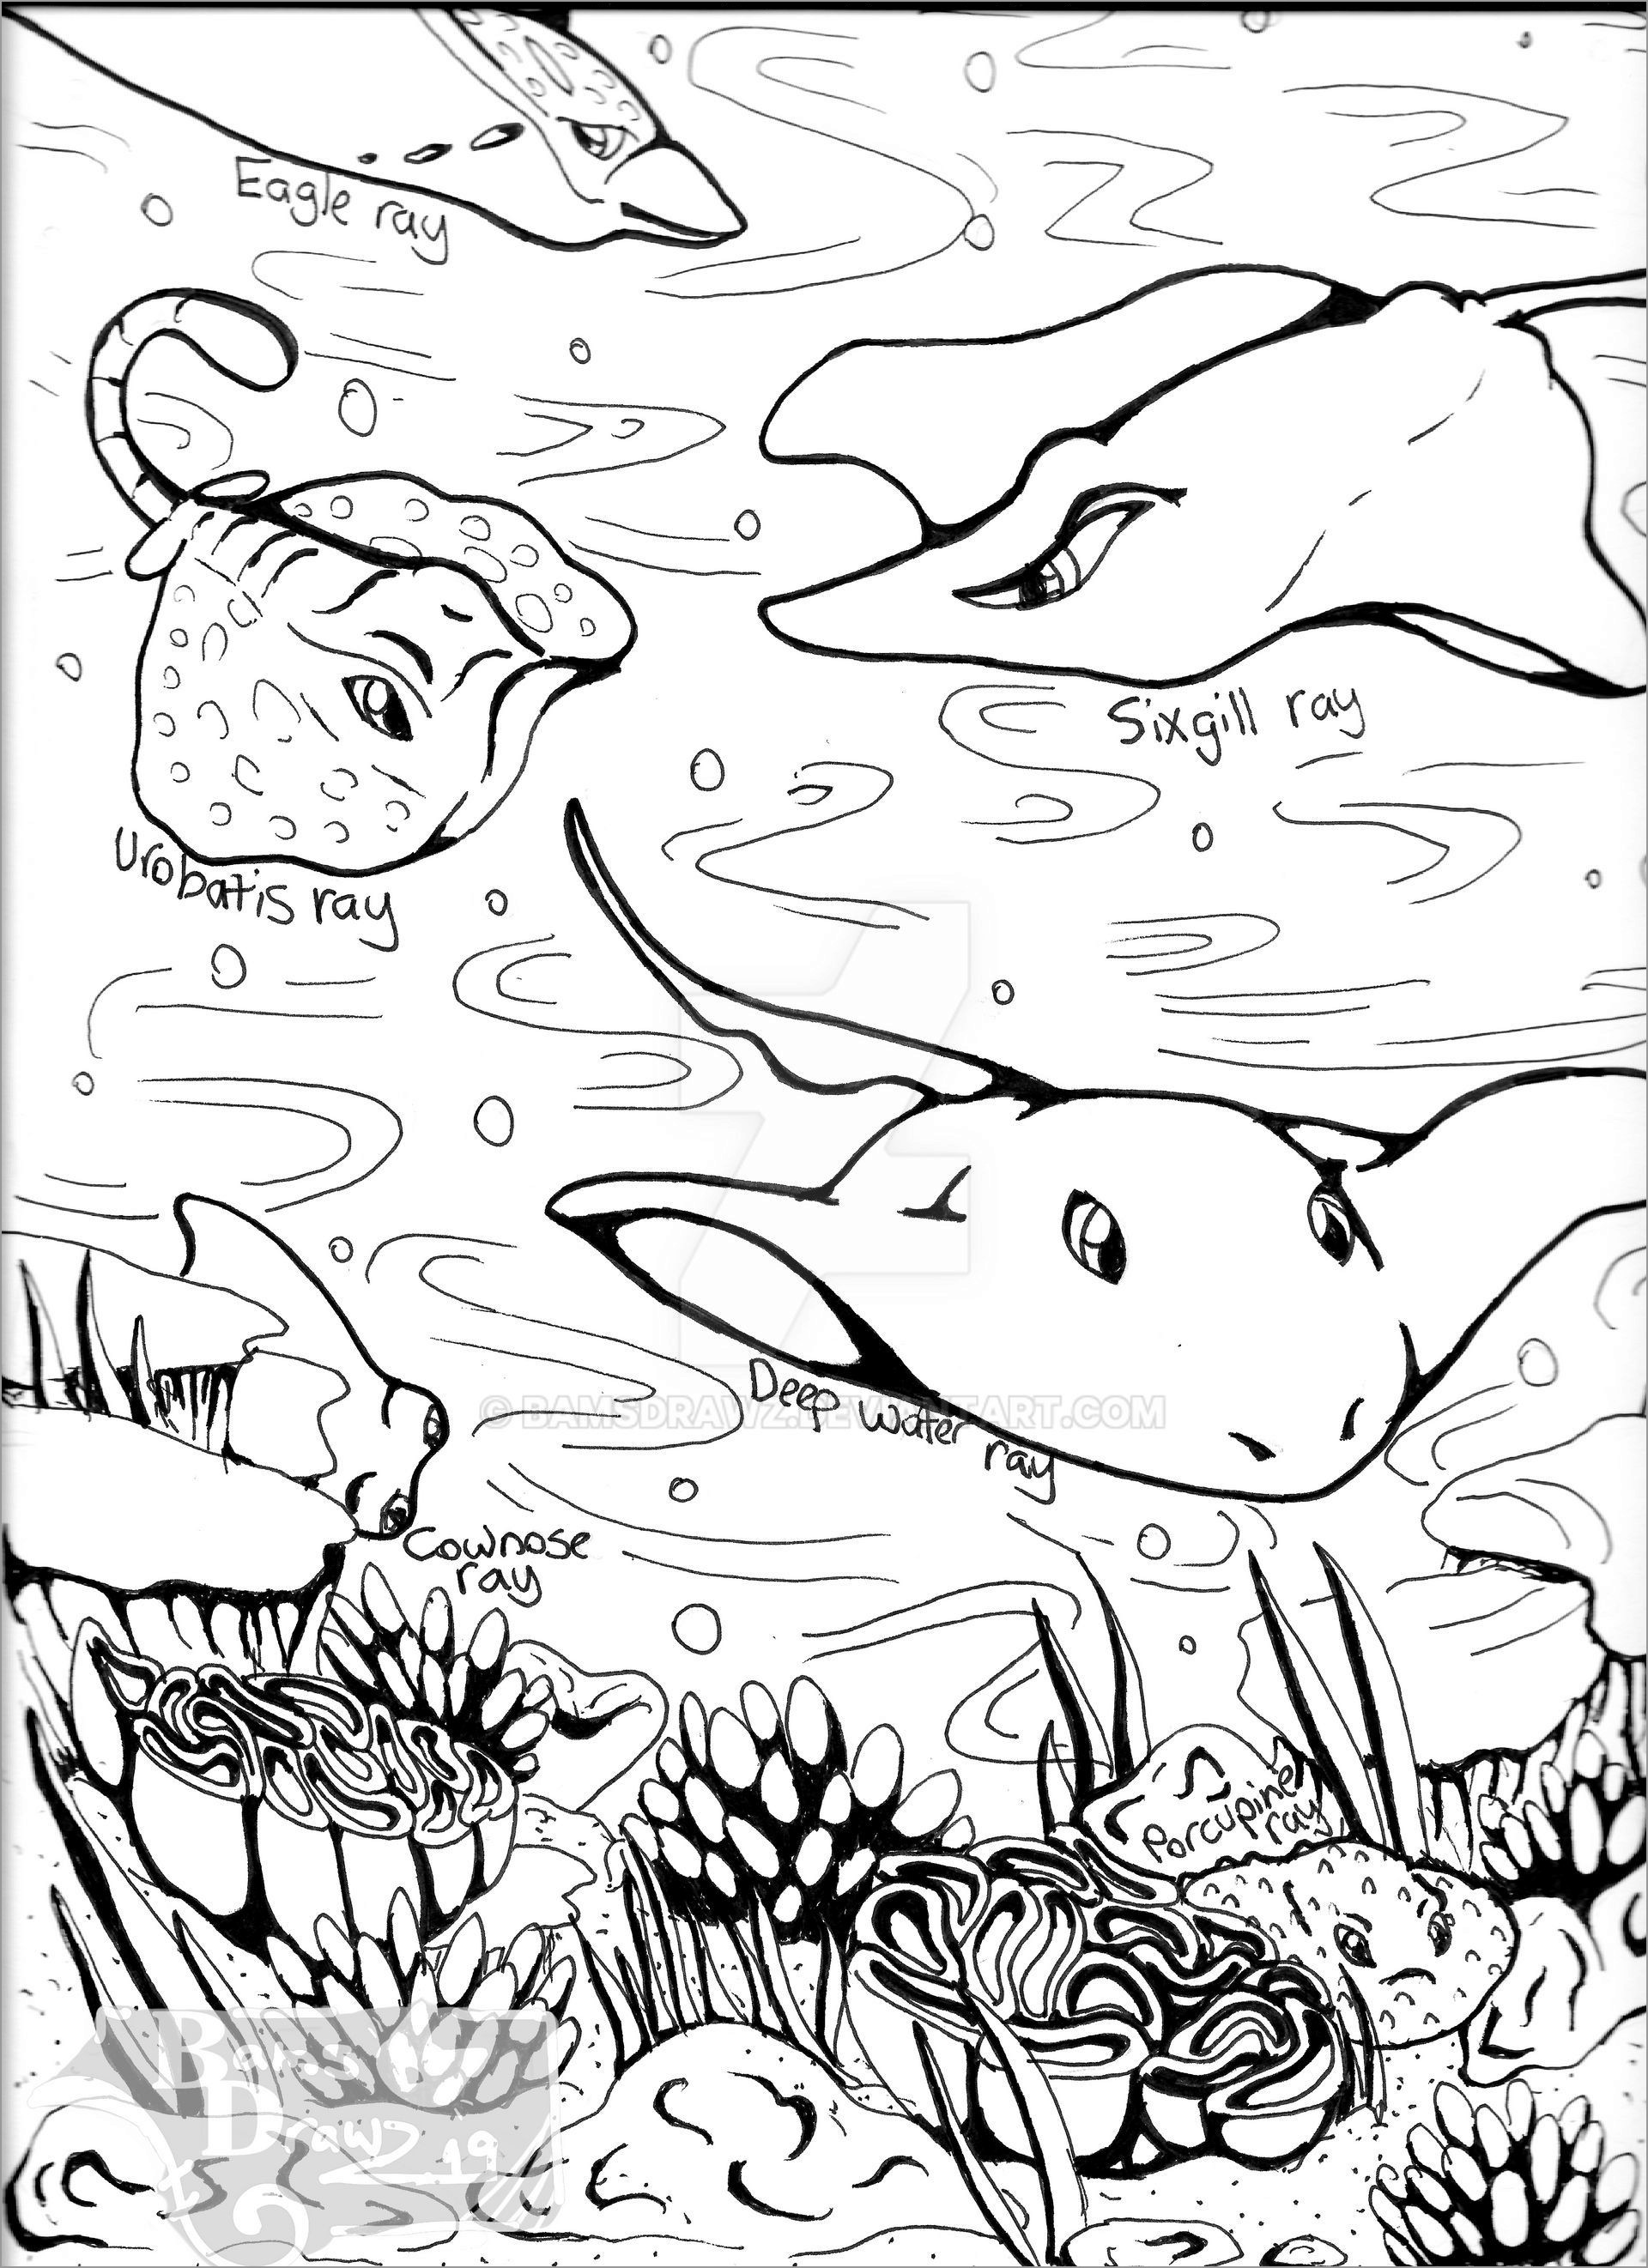 Stingray Coloring Page by Bamsdrawz for Adults